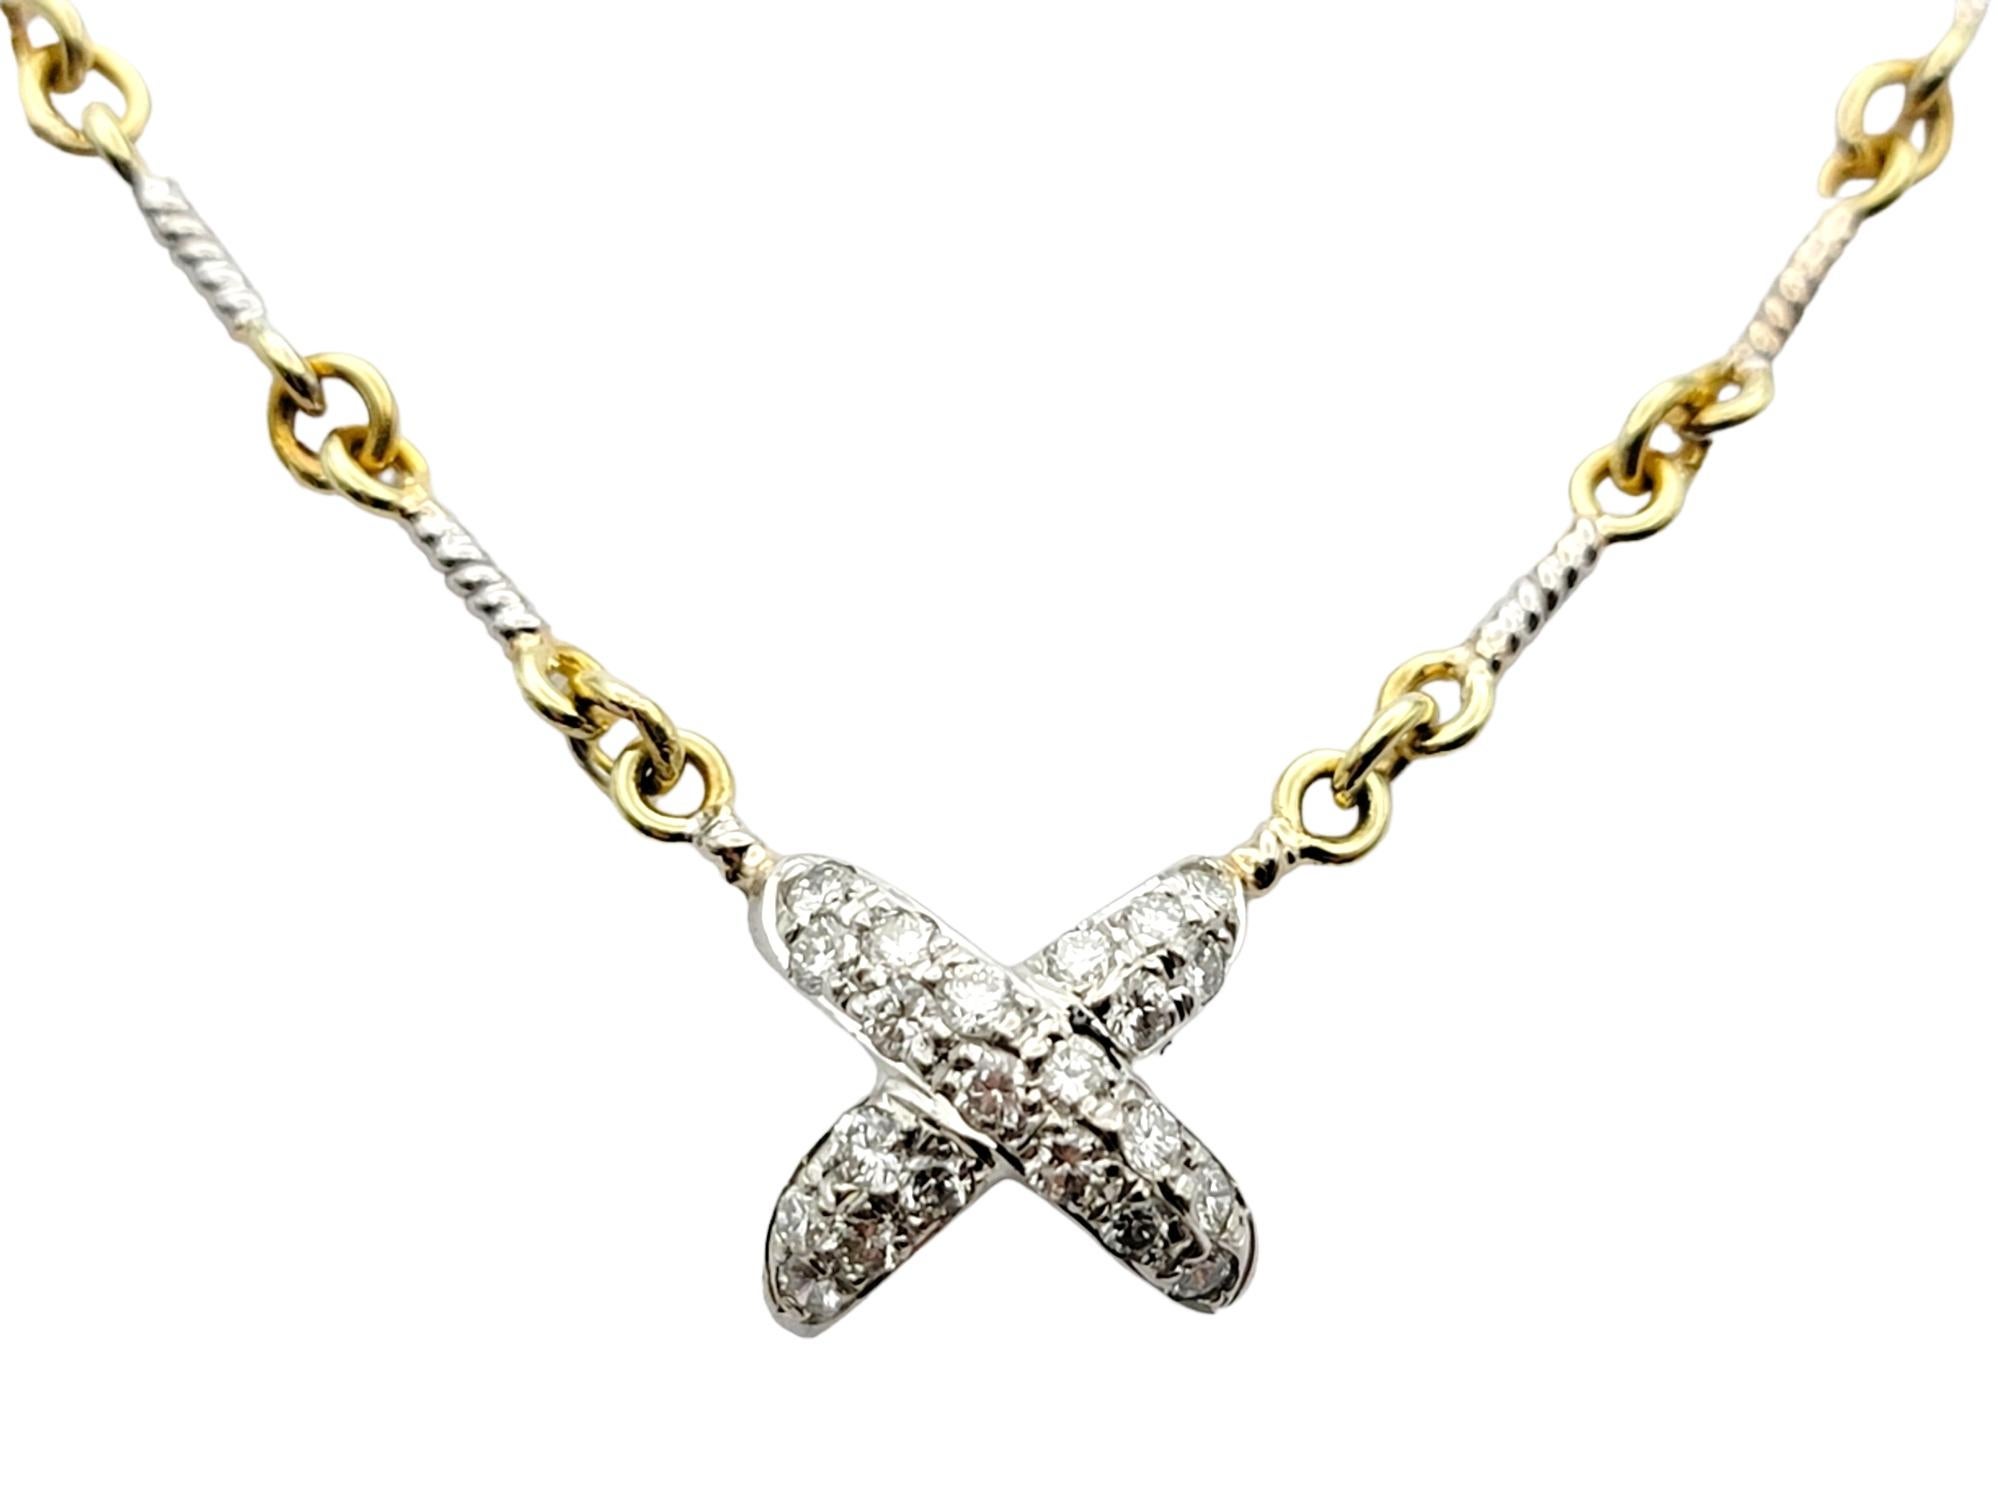 Contemporary 18 Karat Two-Tone Gold Circle Link Necklace with Pave Diamond 'X' Pendant For Sale